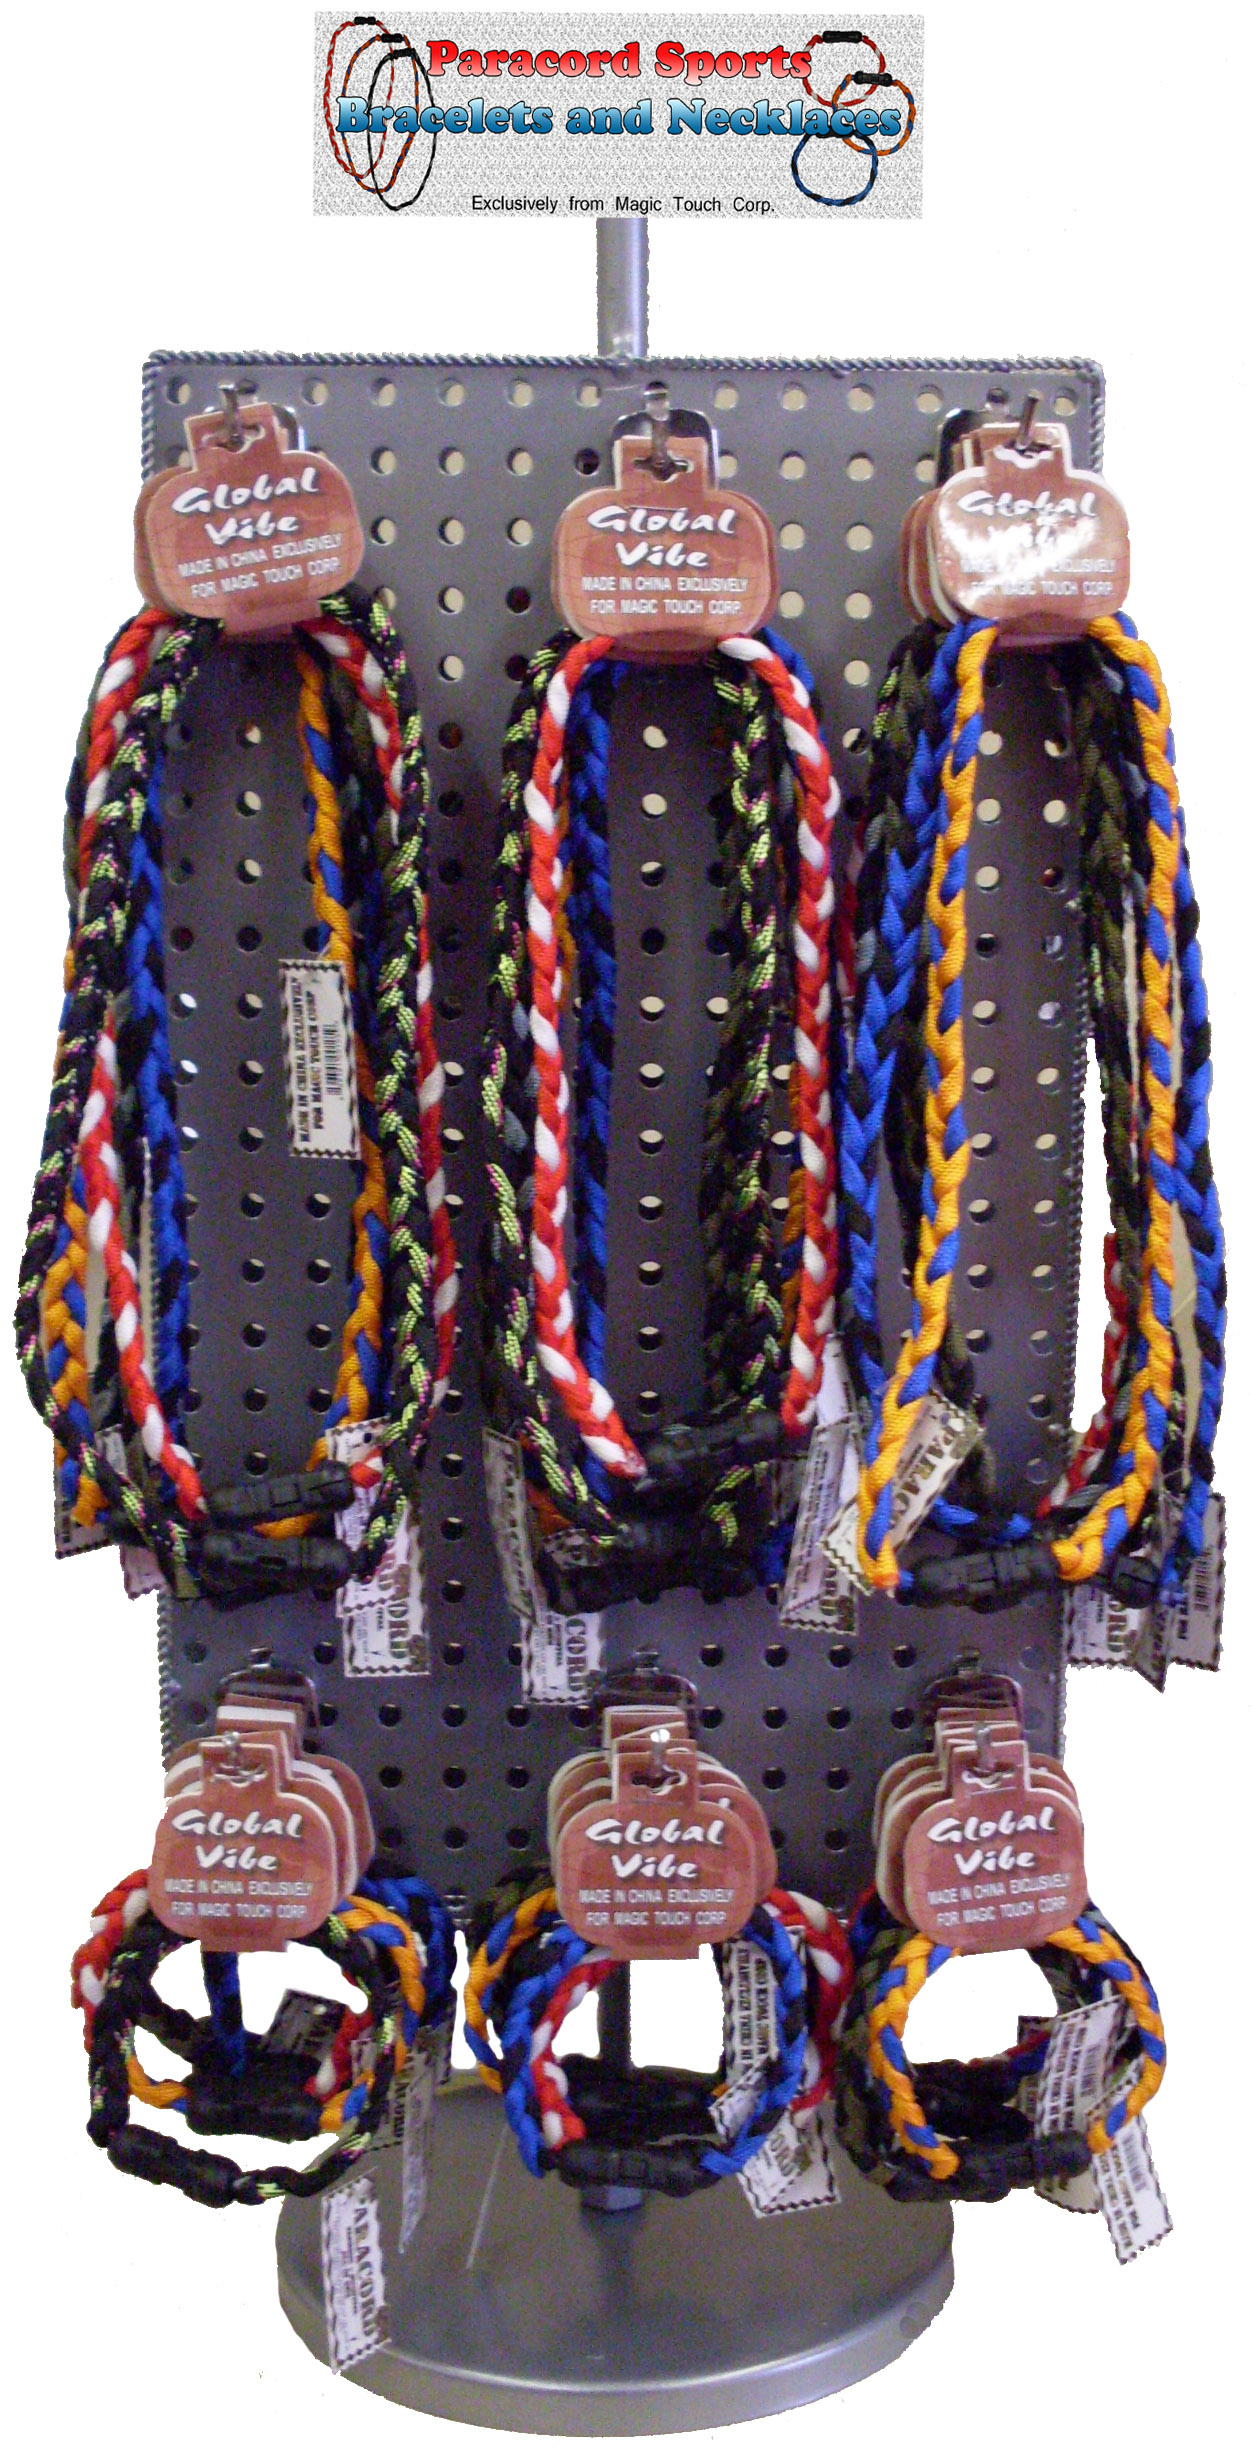 Reduced Price for Special Limited Time Paracord Sports Pre Pack